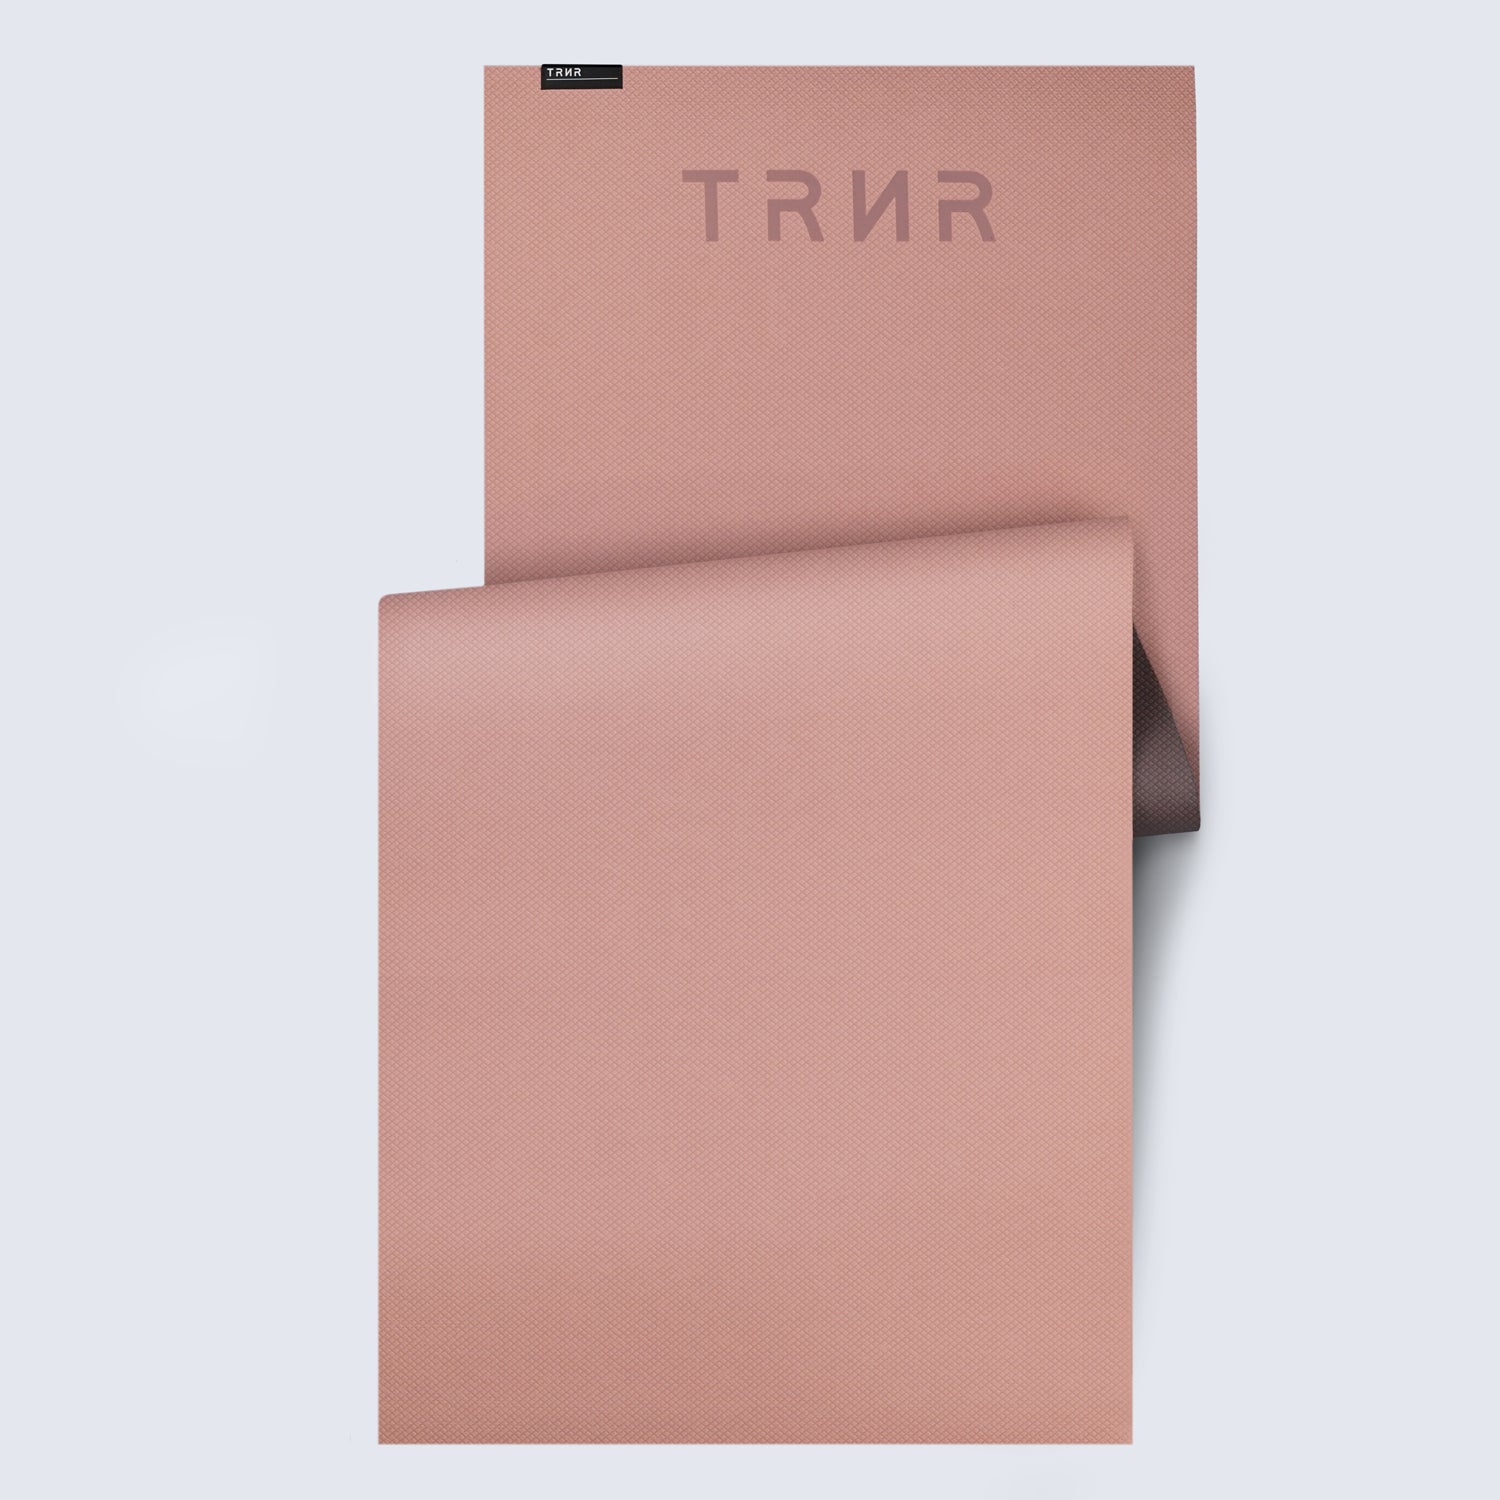  Overview of the Neo Mat 5 mm (Nude/Clay Colour) by TRNR | Featuring Debossed TRNR Logo and Label